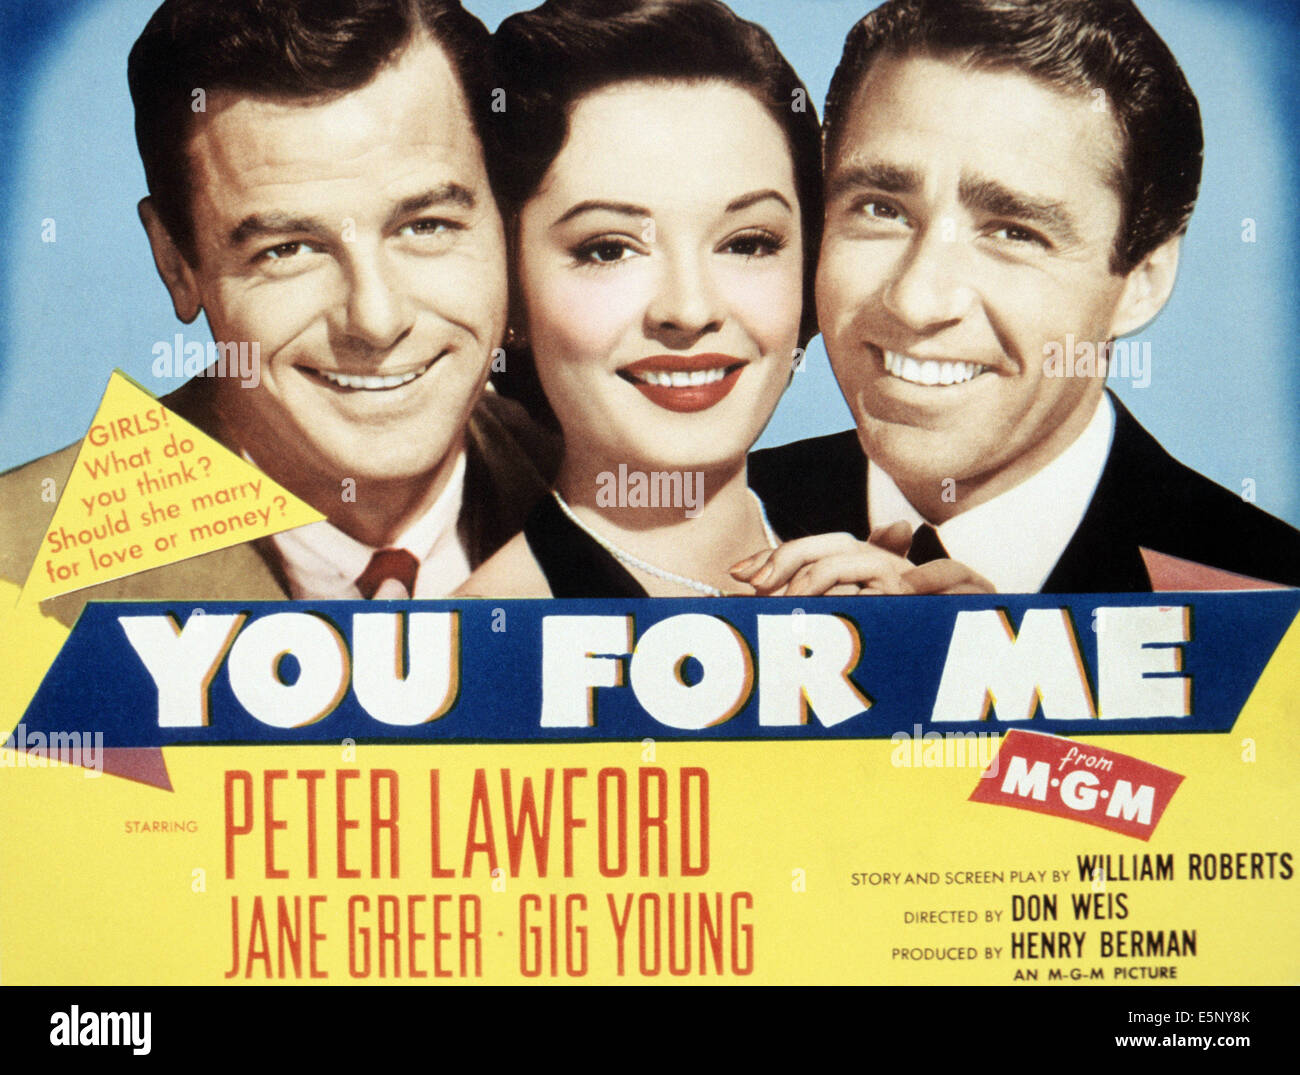 YOU FOR ME, from left: Gig Young, Jane Greer, Peter Lawford, 1952 Stock Photo